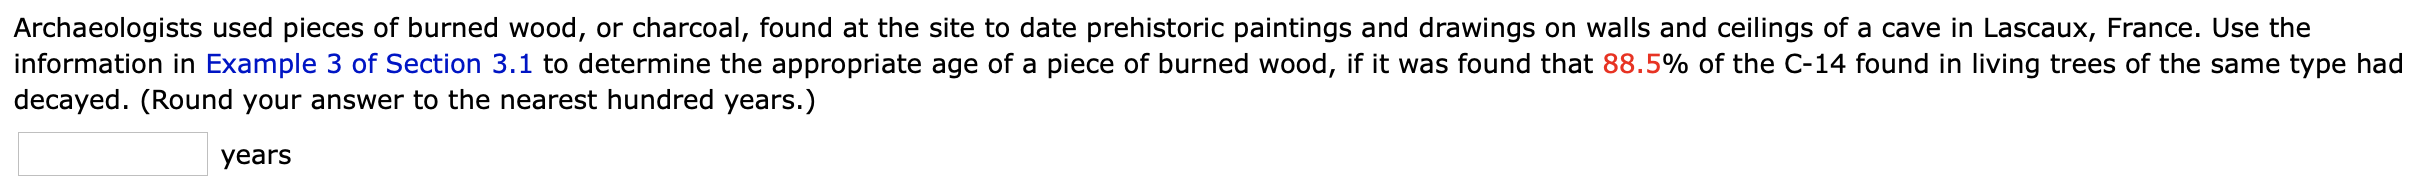 Archaeologists used pieces of burned wood, or charcoal, found at the site to date prehistoric paintings and drawings on walls and ceilings of a cave in Lascaux, France. Use the
information in Example 3 of Section 3.1 to determine the appropriate age of a piece of burned wood, if it was found that 88.5% of the C-14 found in living trees of the same type had
decayed. (Round your answer to the nearest hundred years.)
years
